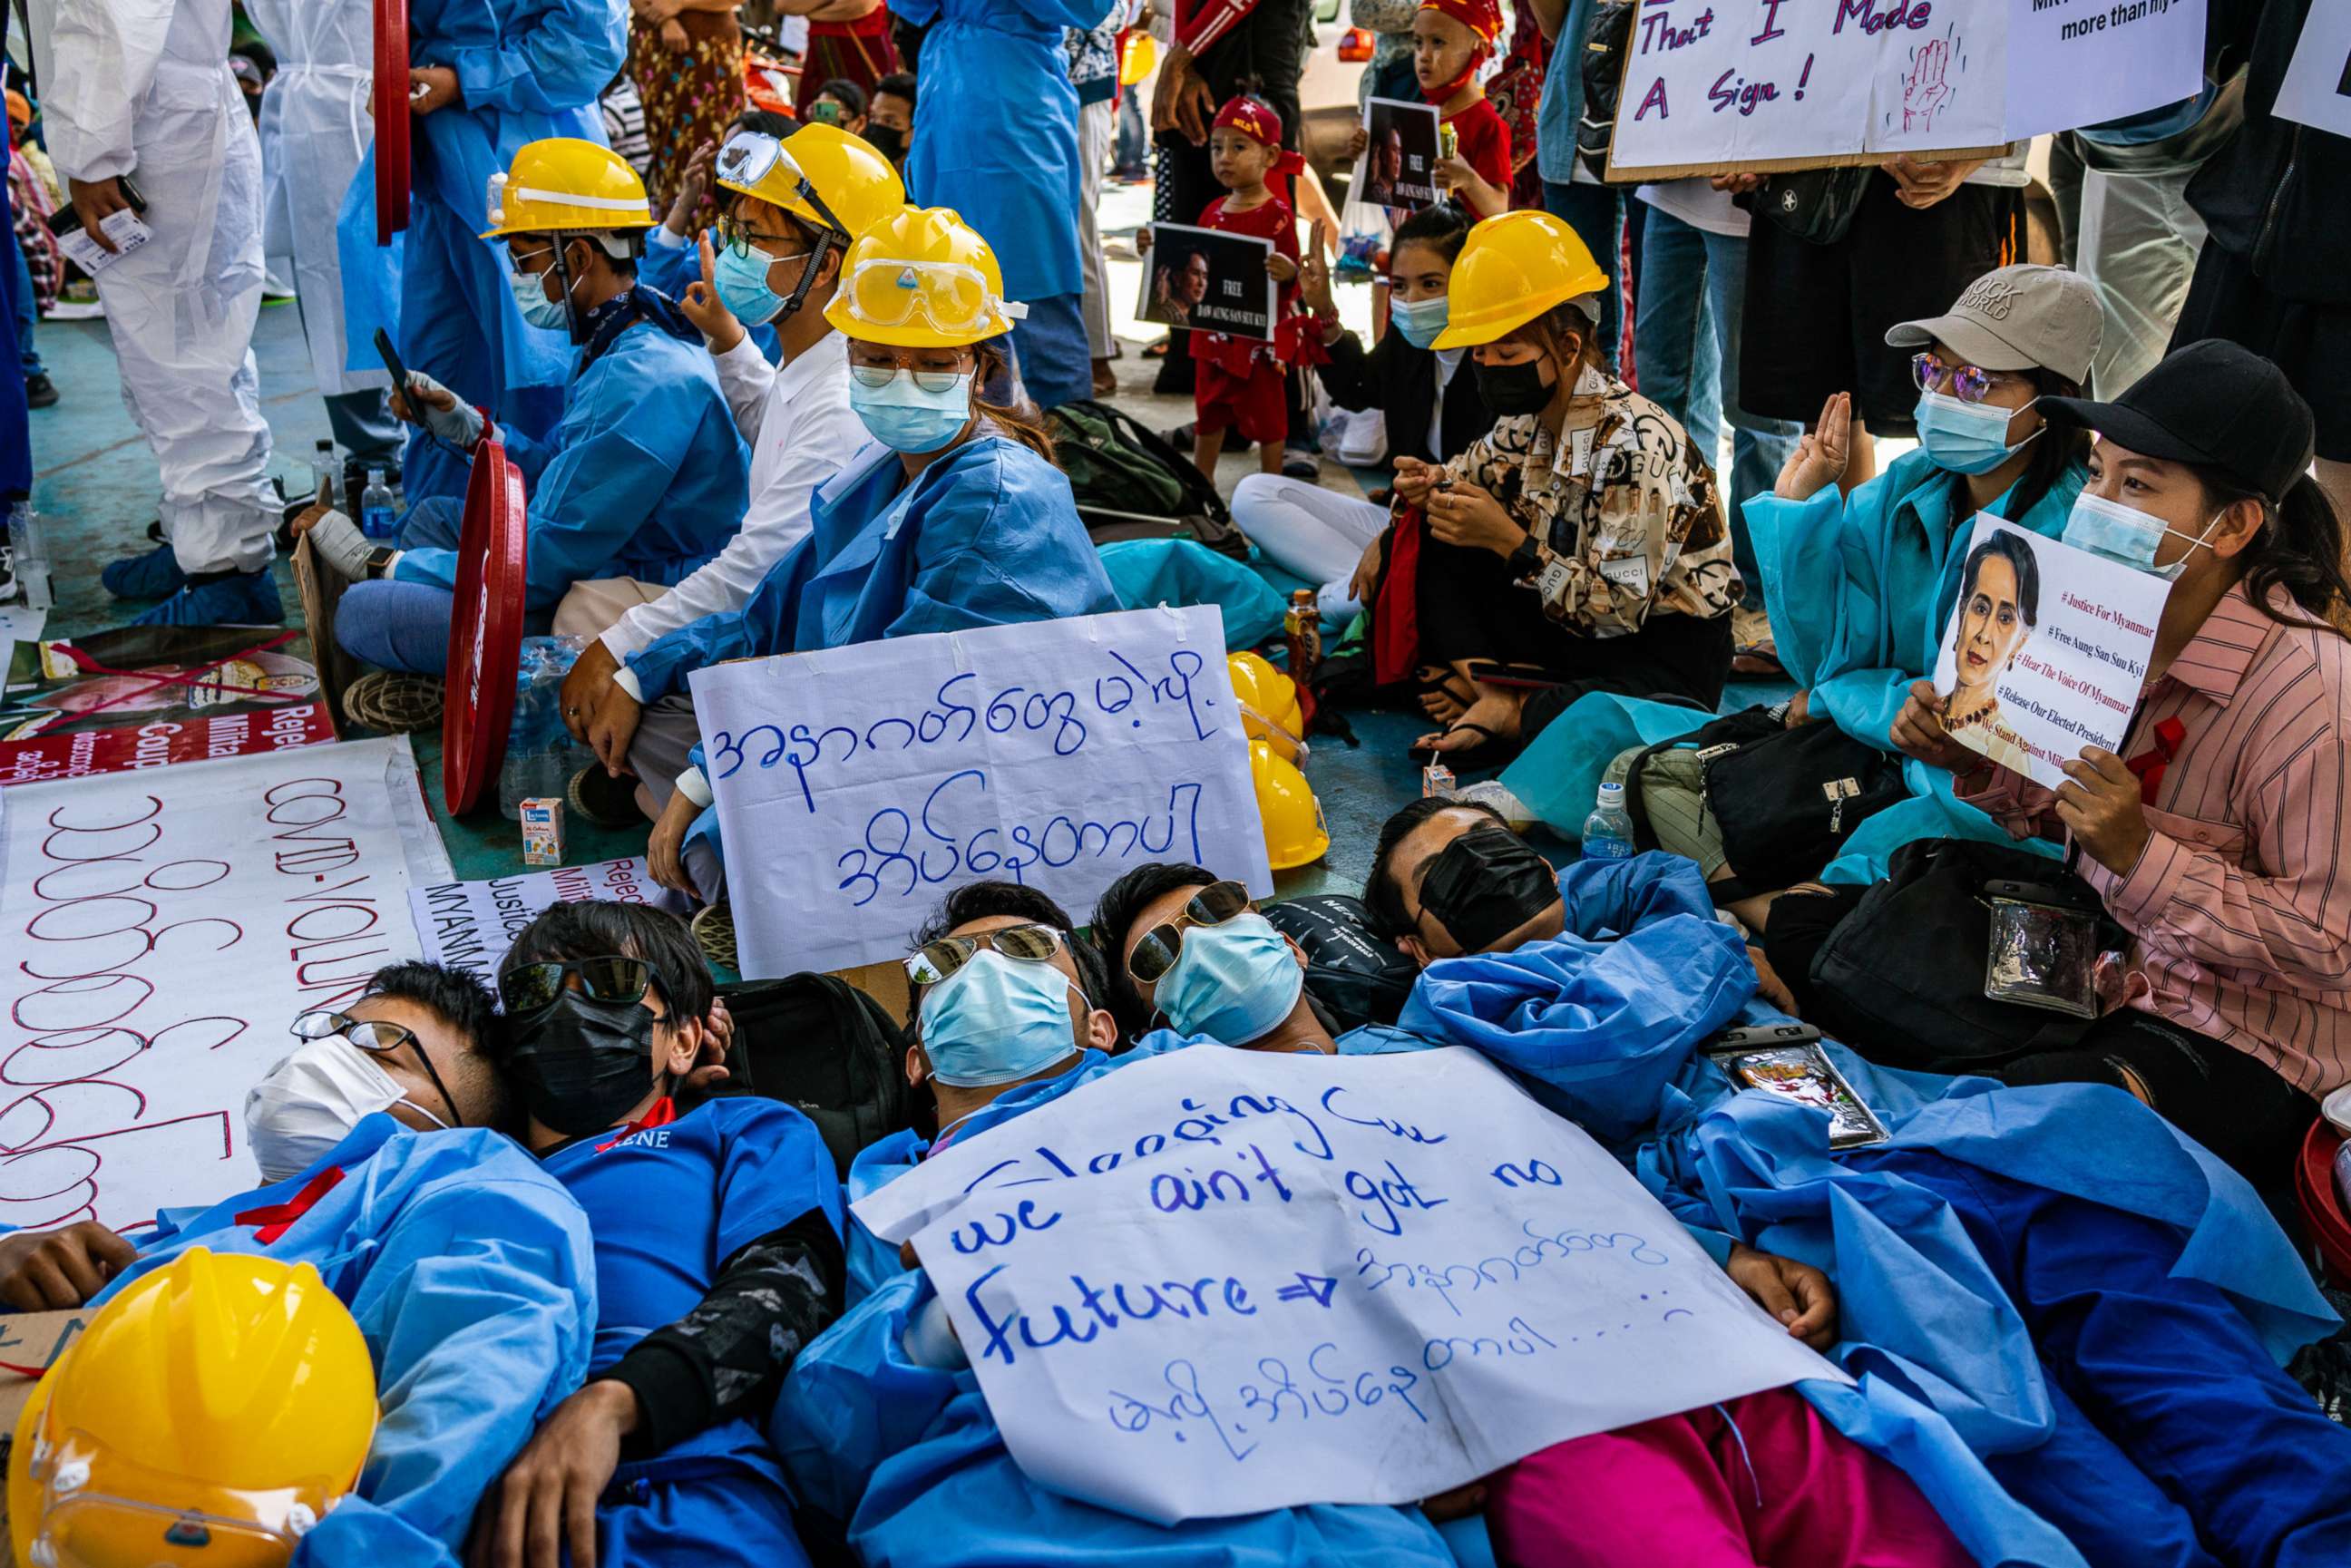 PHOTO: Protesters lies on the ground, Feb. 11, 2021 in Yangon, Myanmar. Myanmar declared martial law in parts of the country as massive protests continued to draw people to the streets a week after the country's military junta staged a coup.